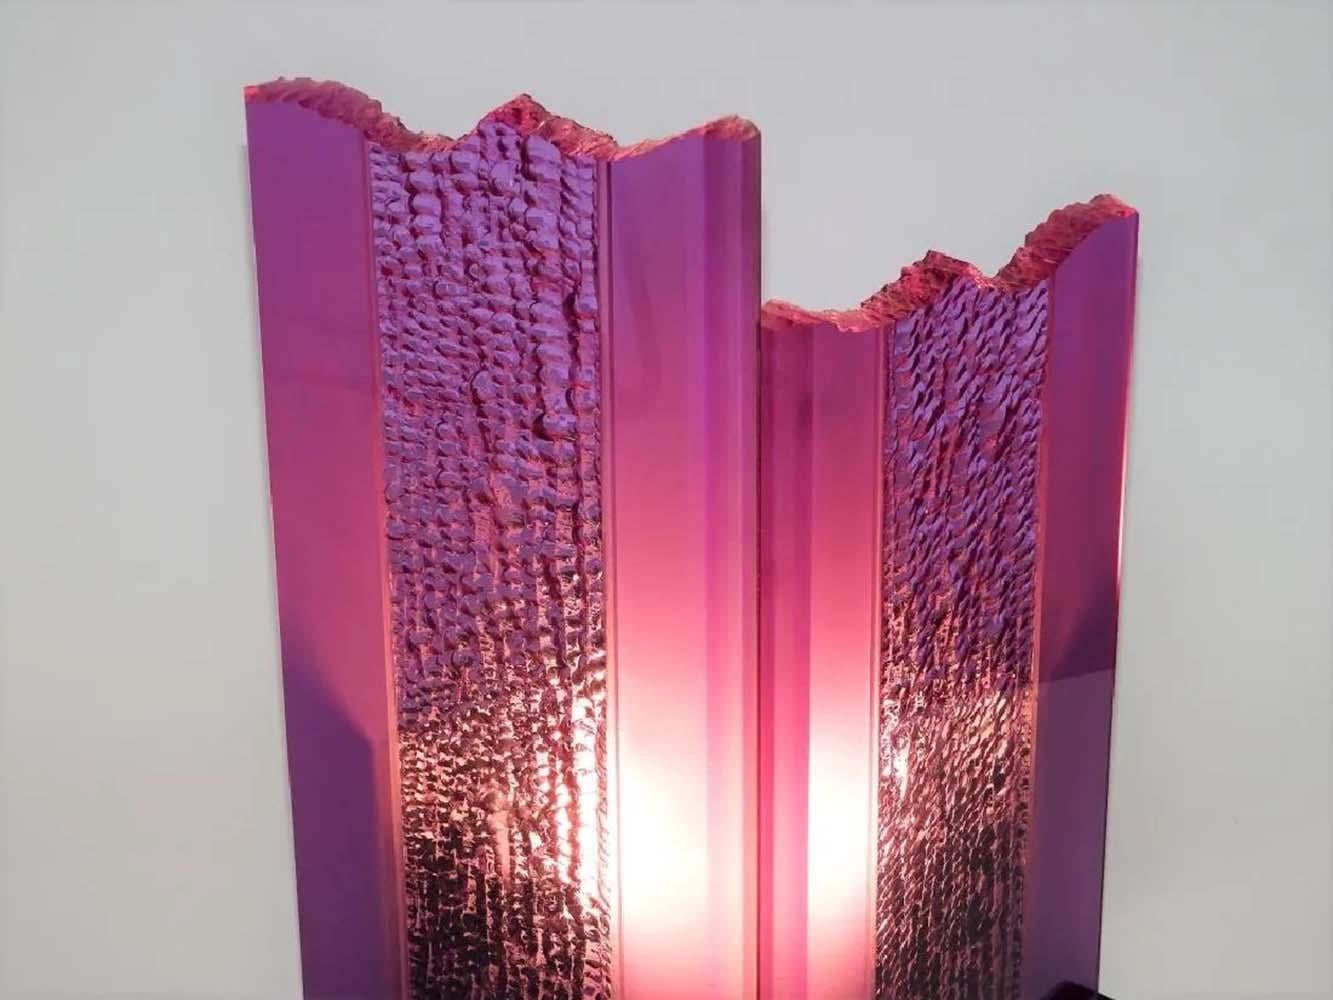 Post-Modern Shlomi Haziza HStudio Los Angeles 1990s Polished & Chipped Lucite Table Lamp 